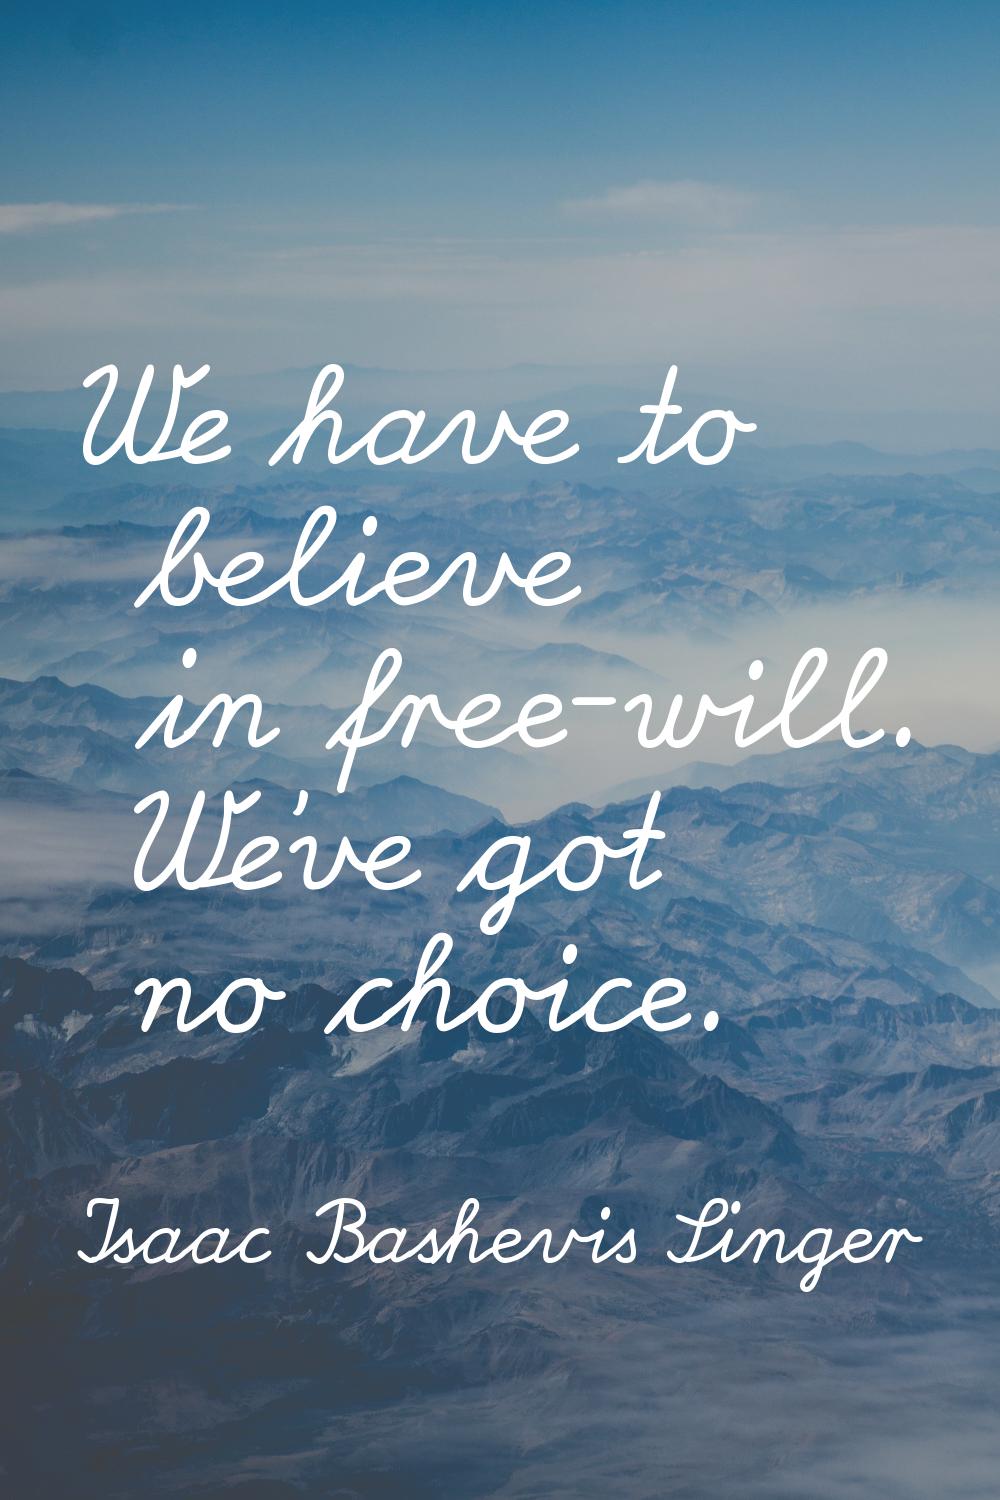 We have to believe in free-will. We've got no choice.